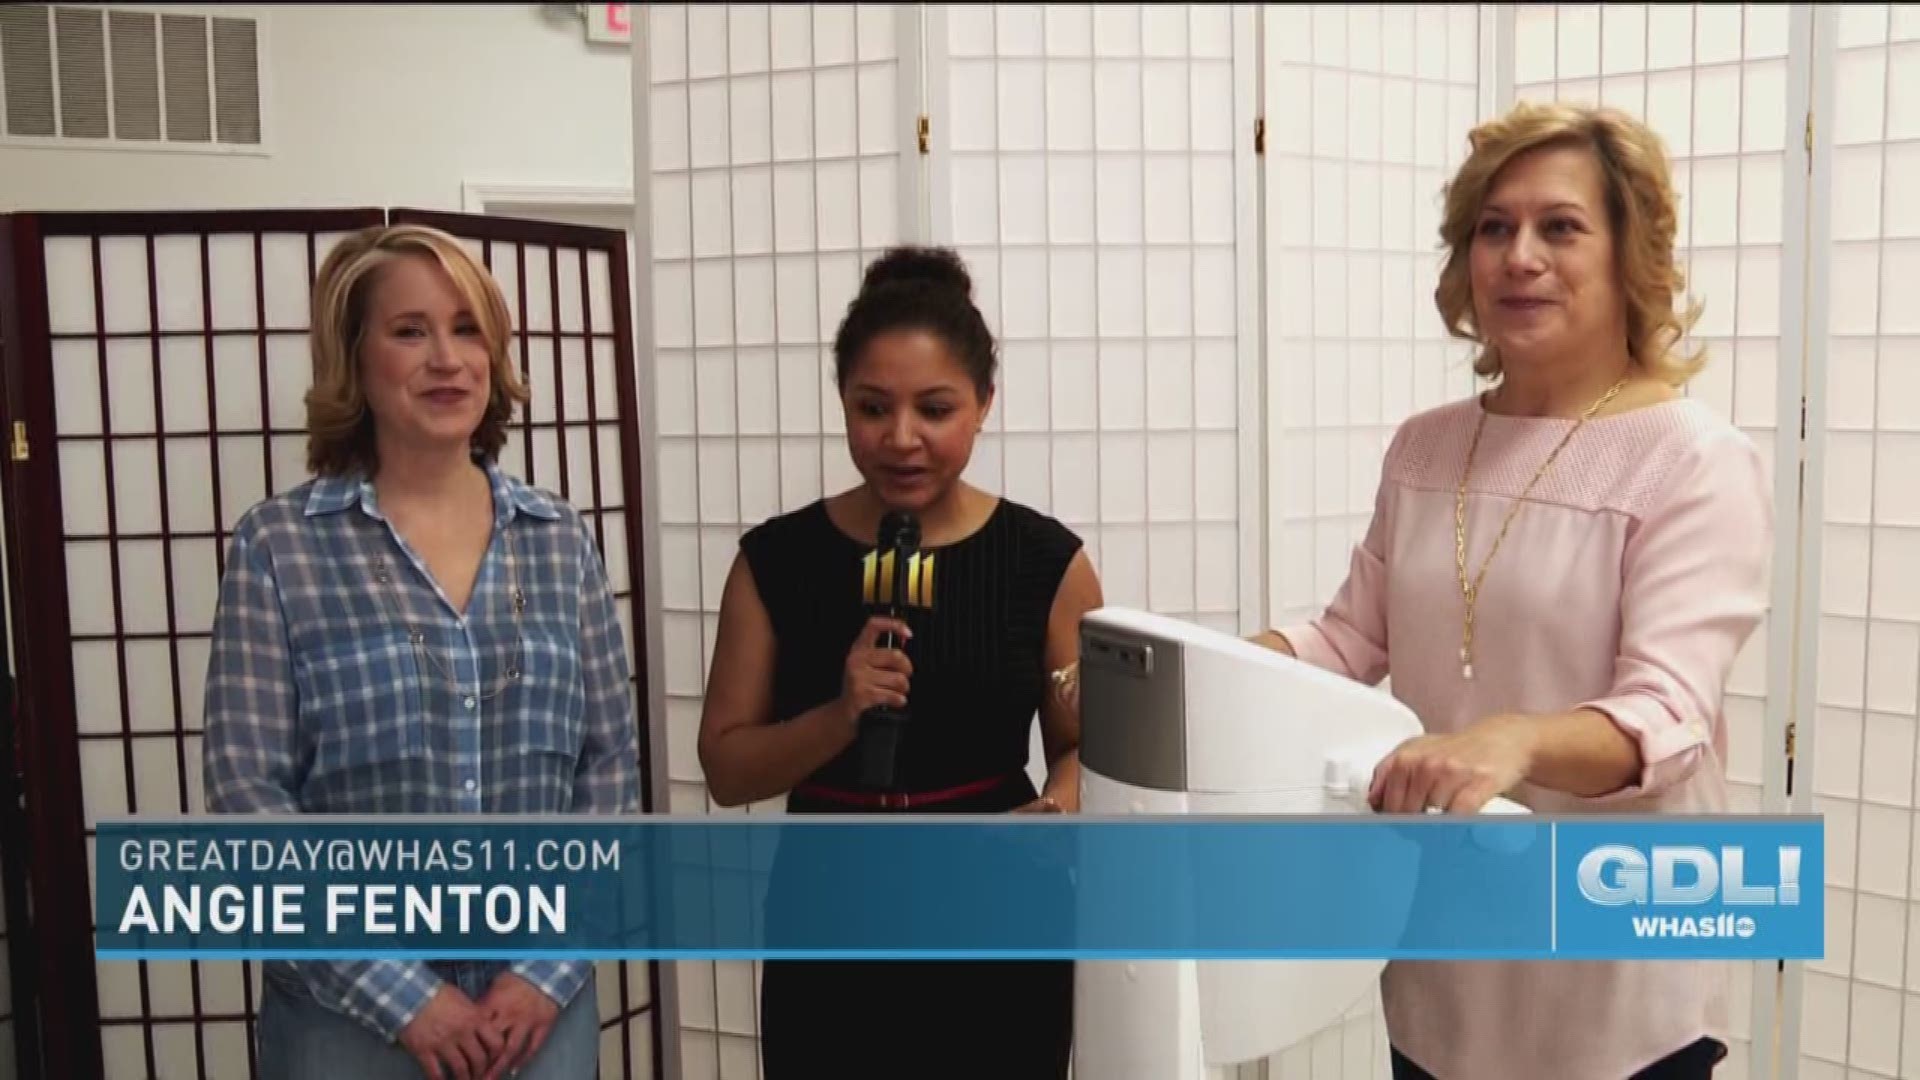 Angie Fenton stops by R�ve Body Sculpting to discuss how to achieve fat loss and fitness goals.